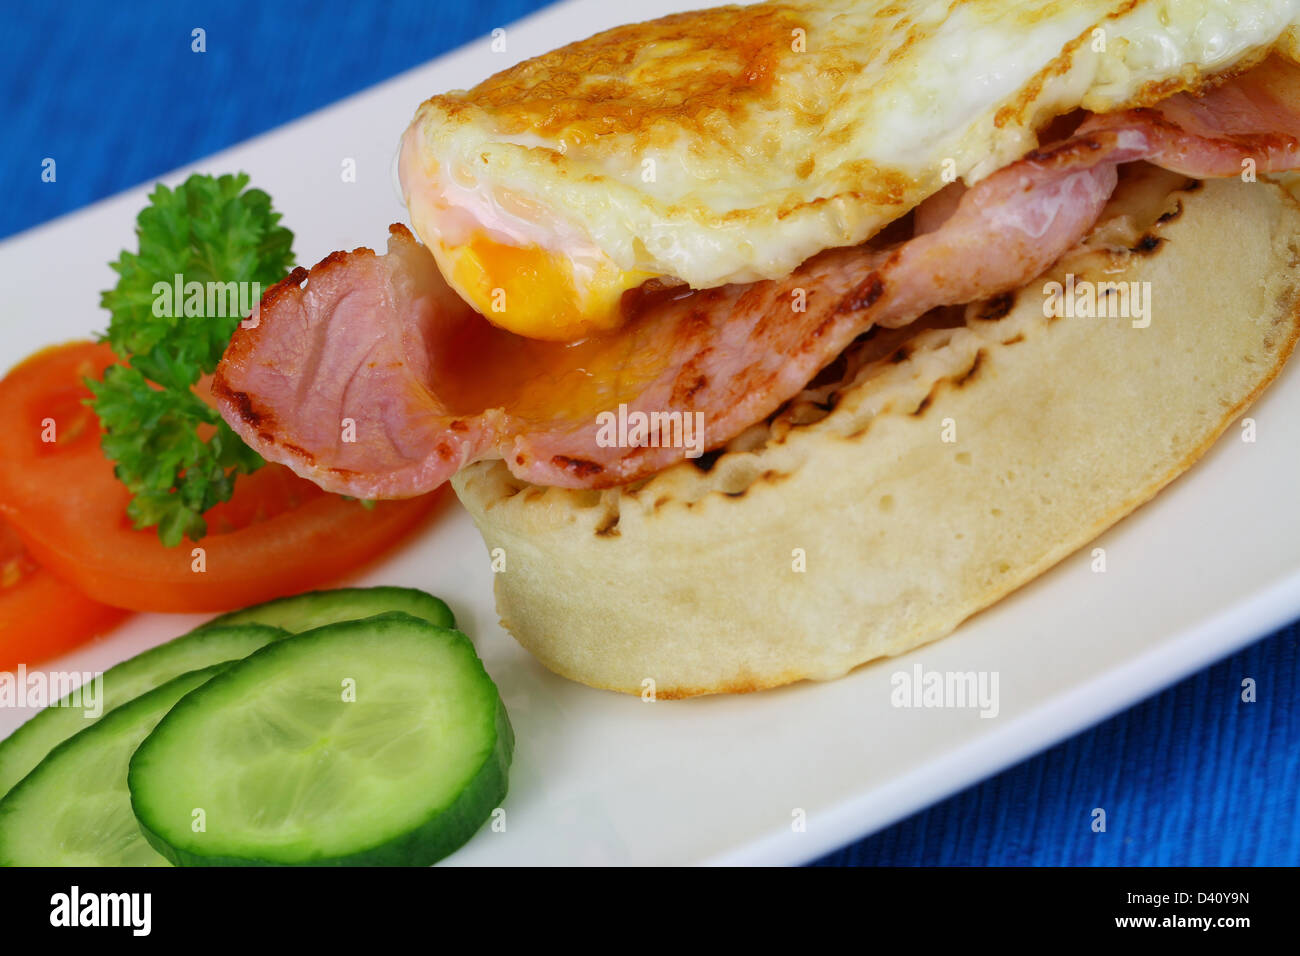 Crumpet with bacon and fried egg Stock Photo